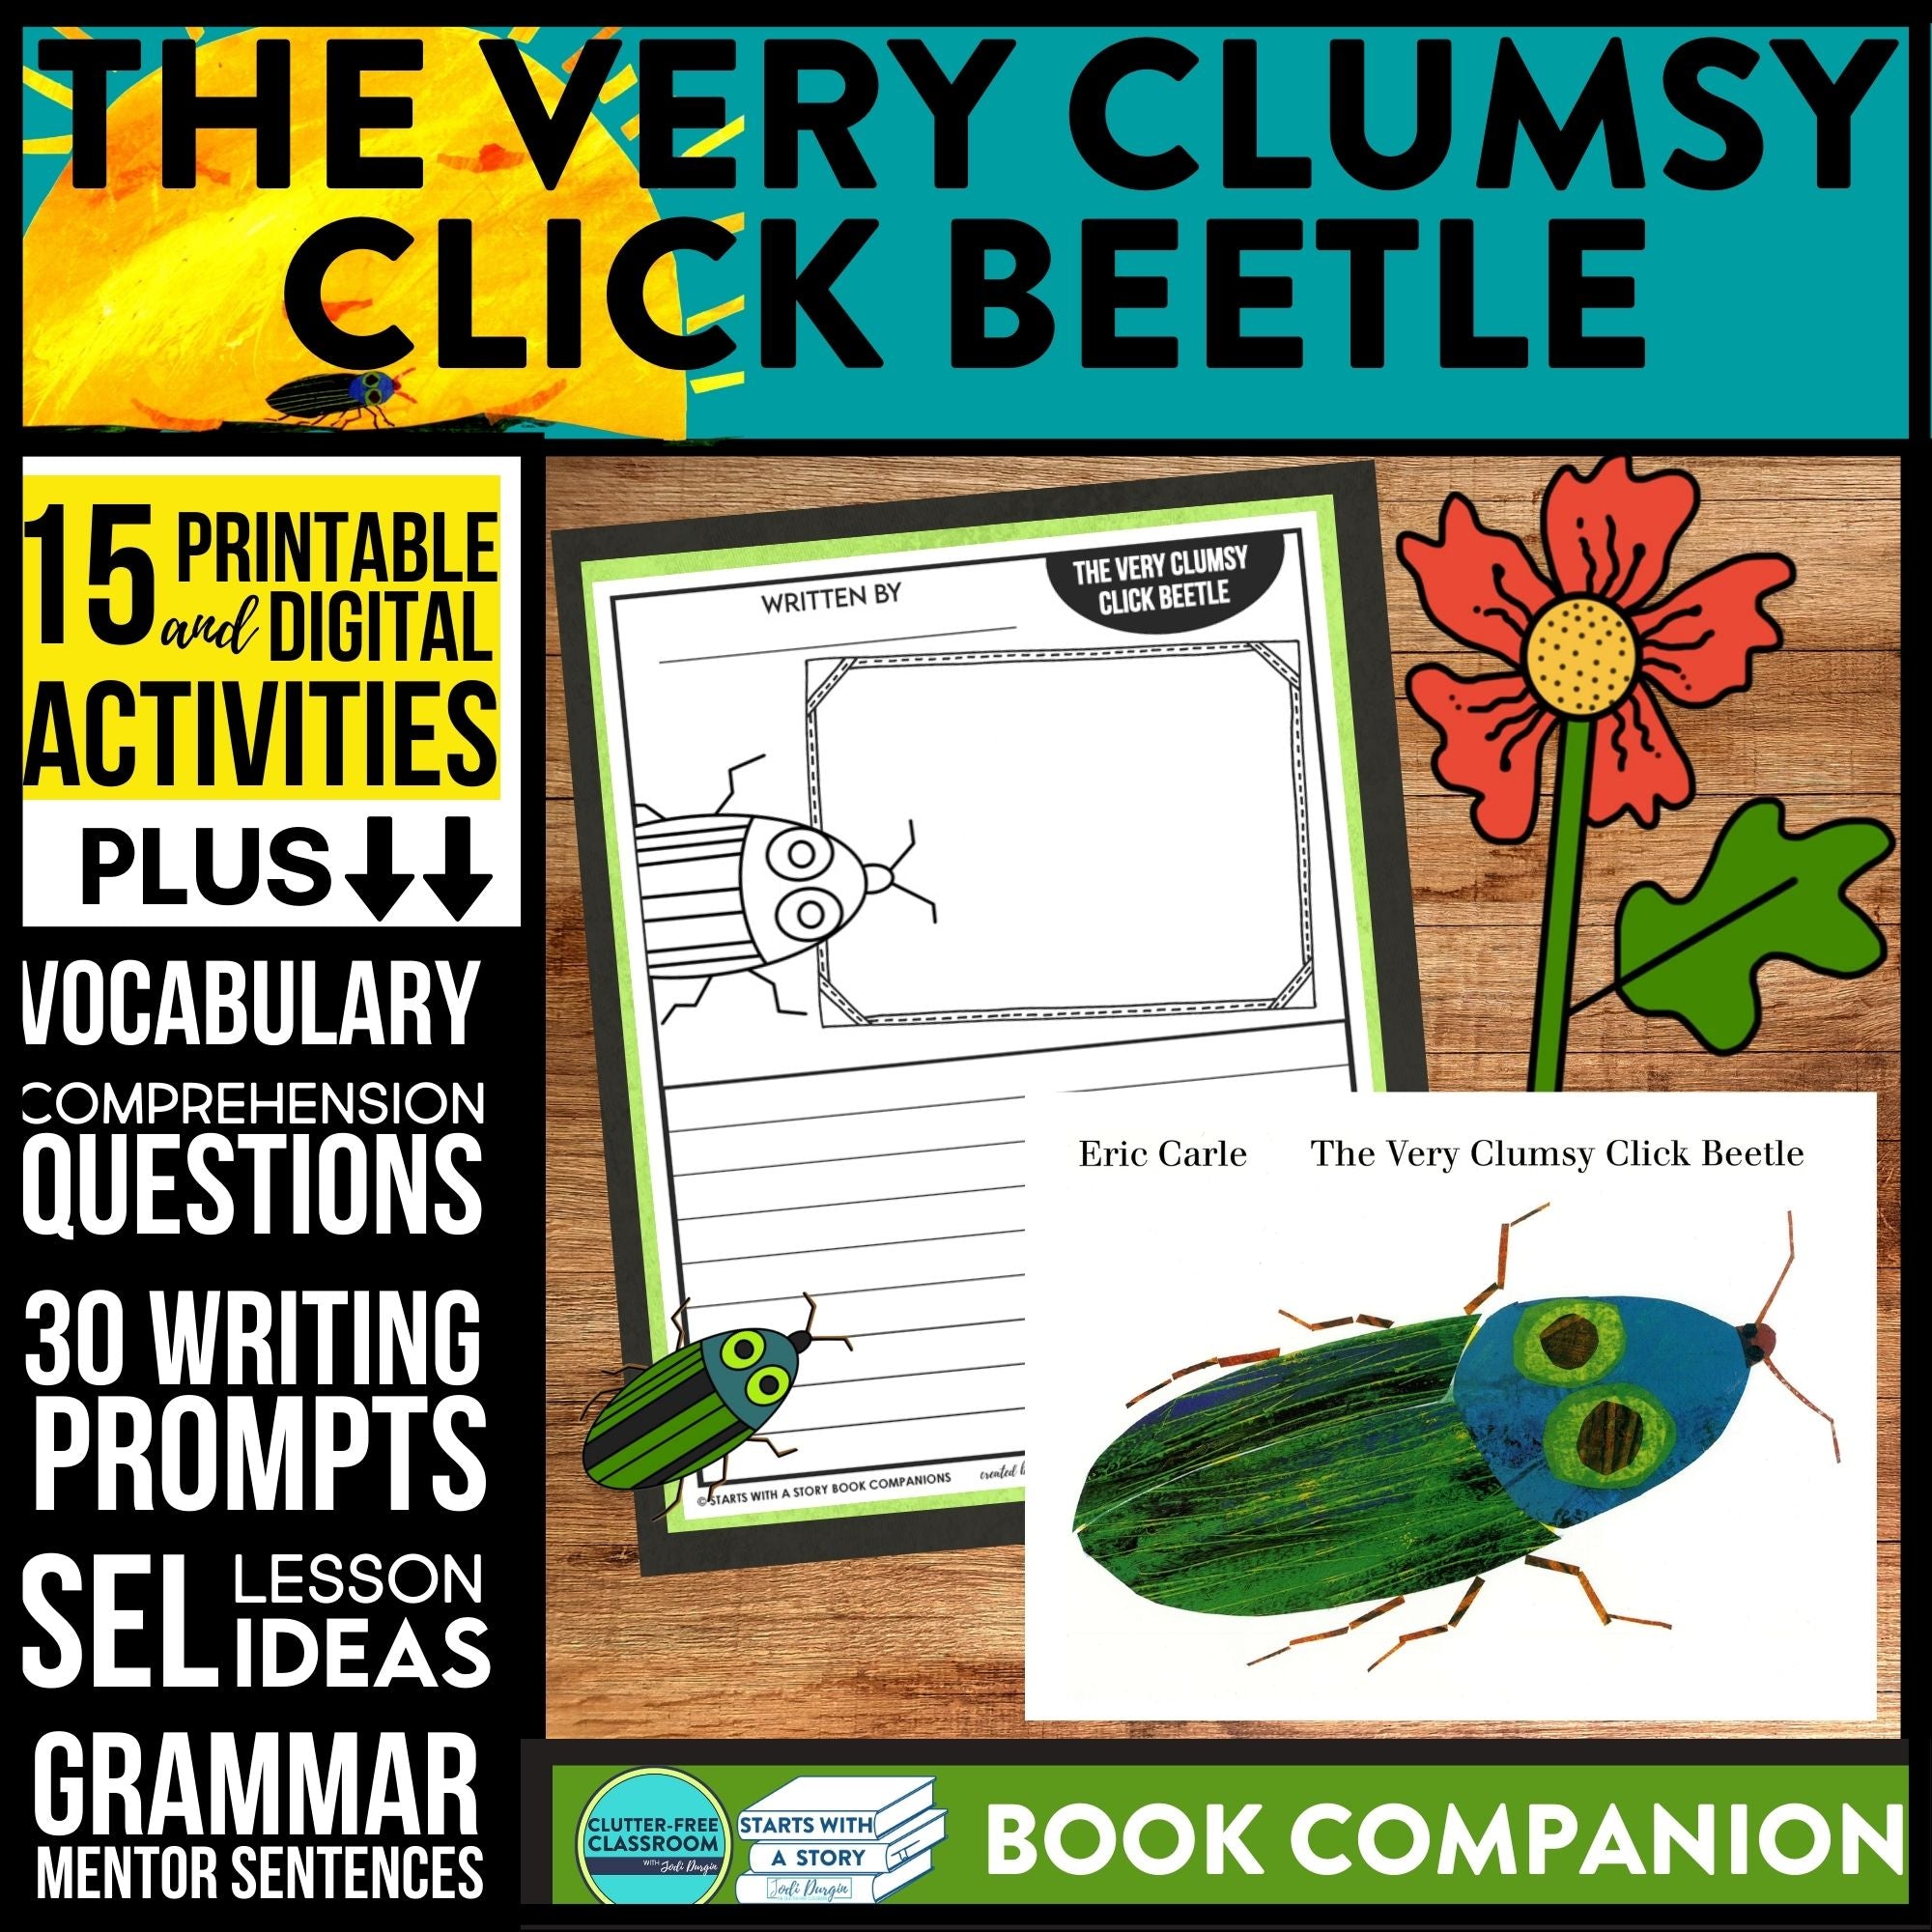 THE VERY CLUMSY CLICK BEETLE activities and lesson plan ideas